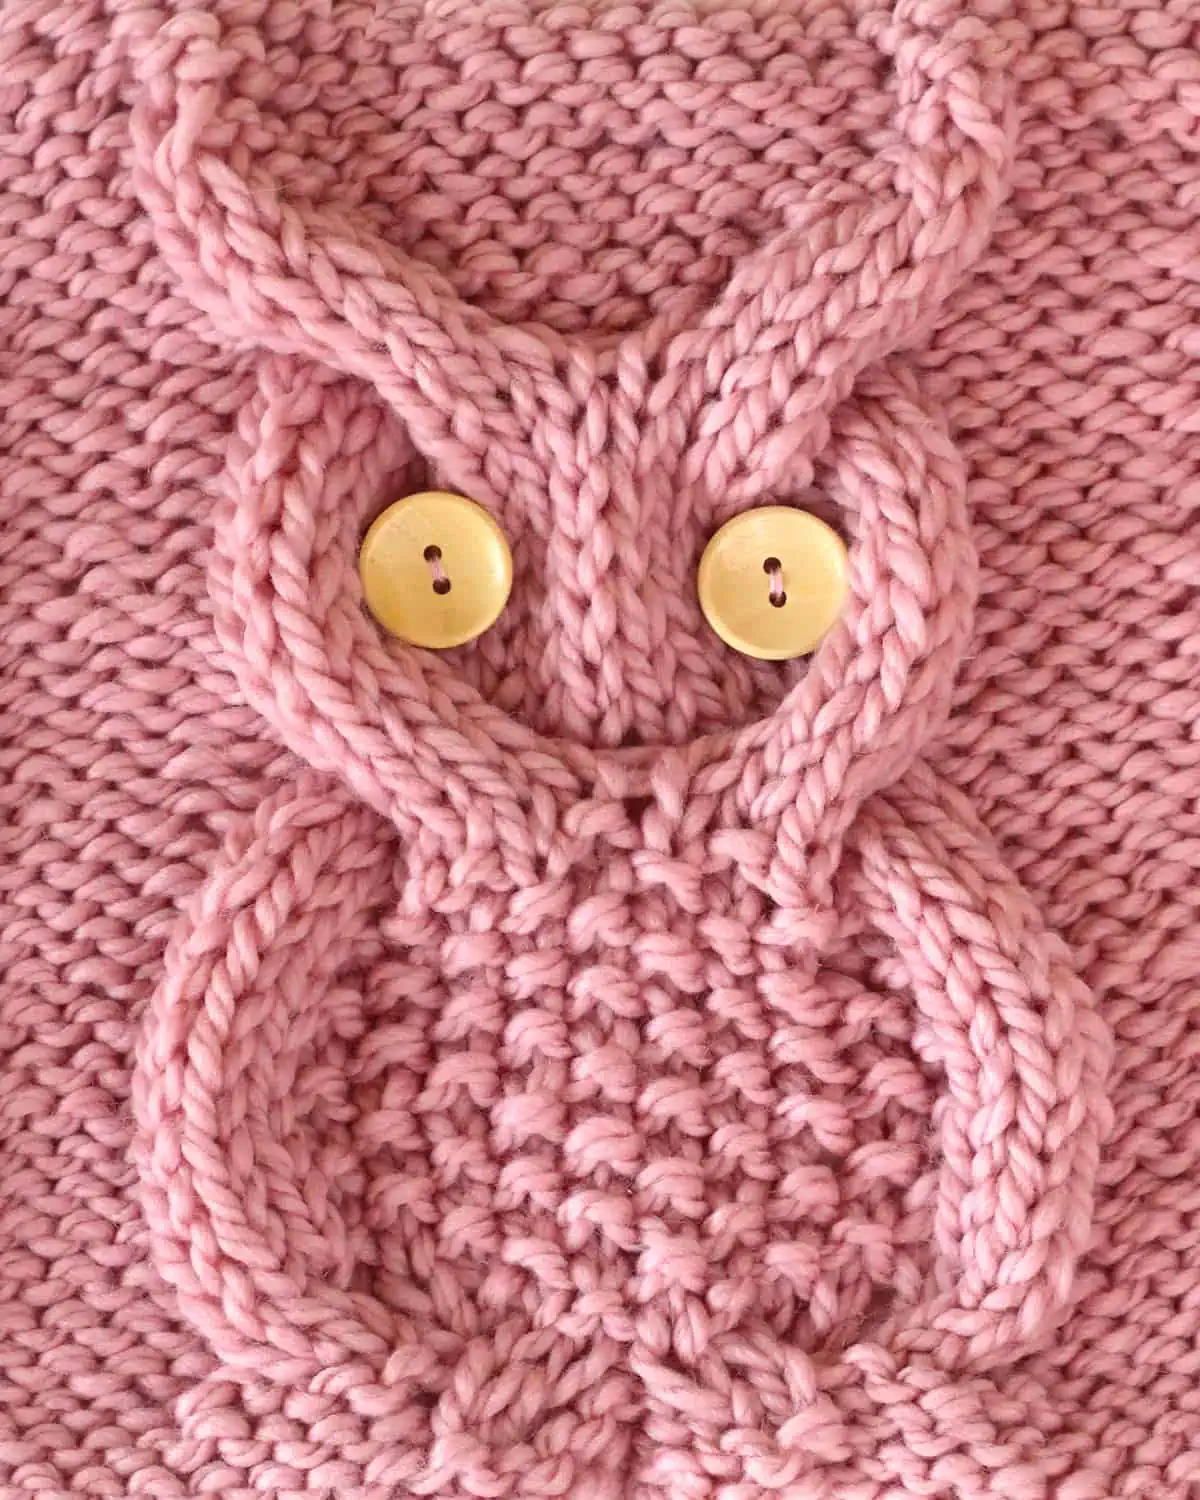 Owl Cable Stitch in pink yarn color with button eyes by Studio Knit.